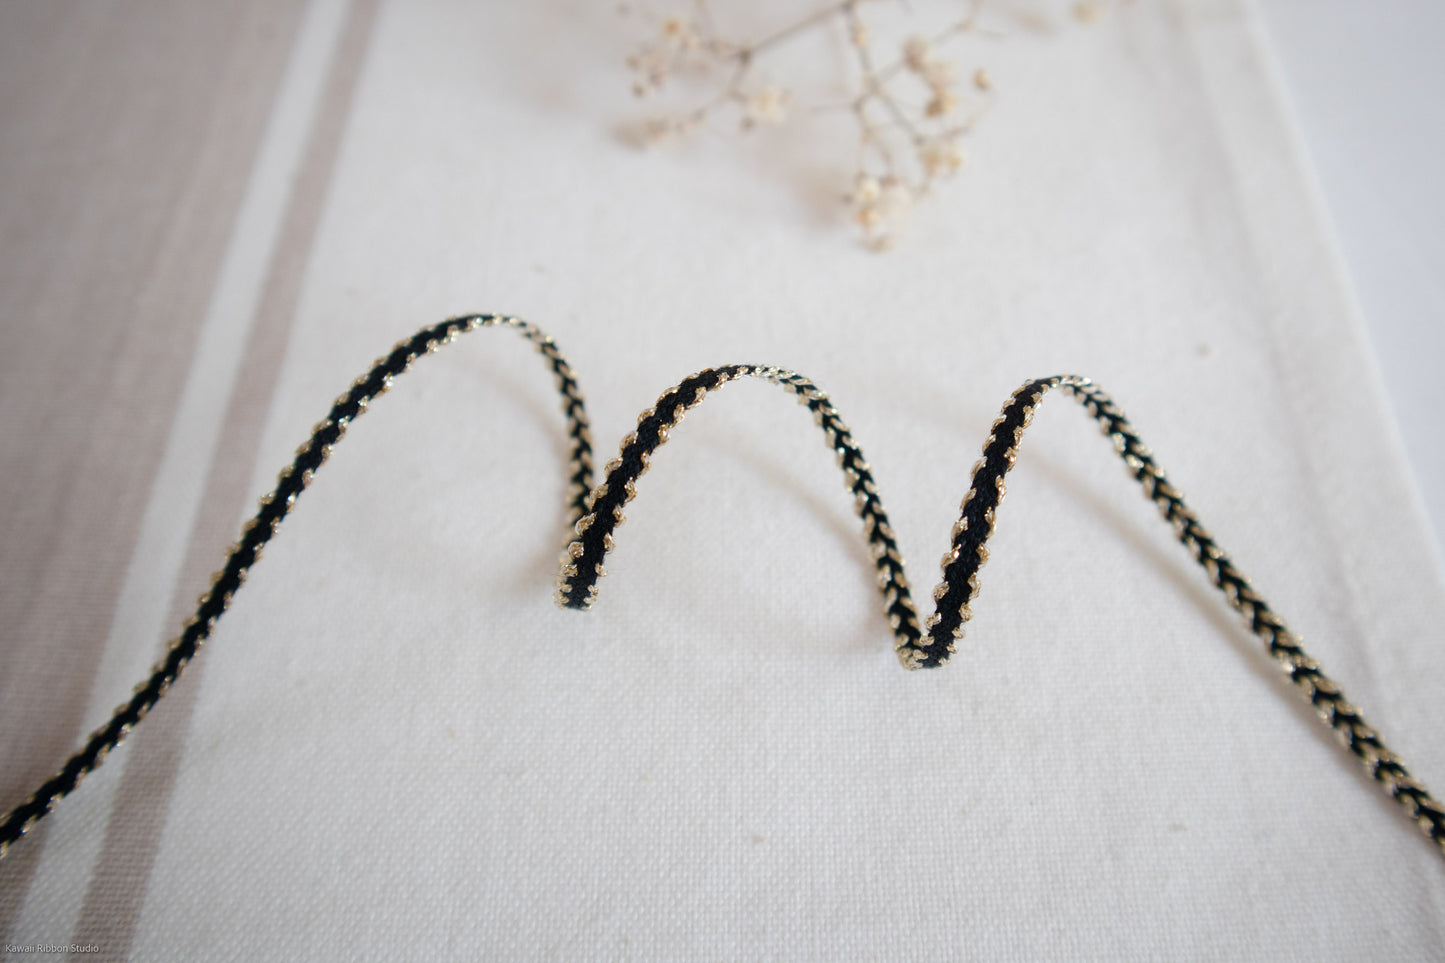 4mm Black gold metallic jewelry cord in washed linen